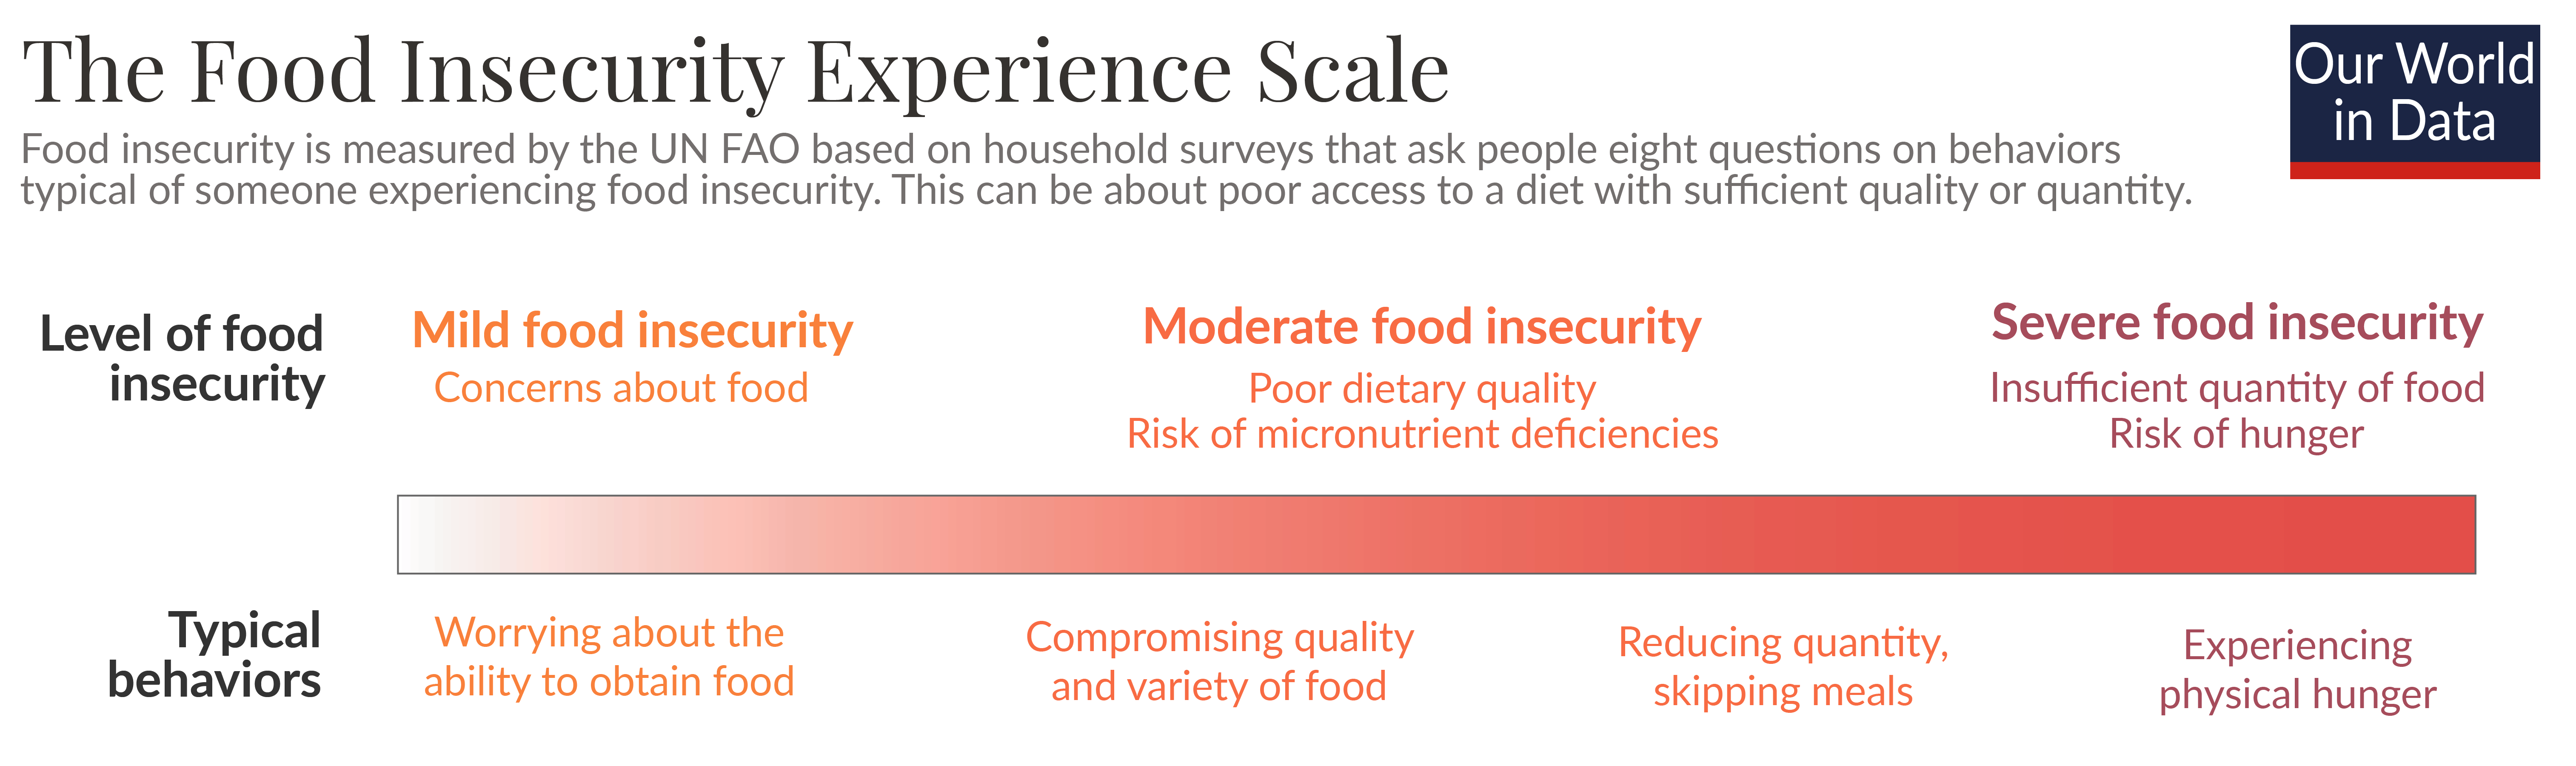 Food insecurity scale